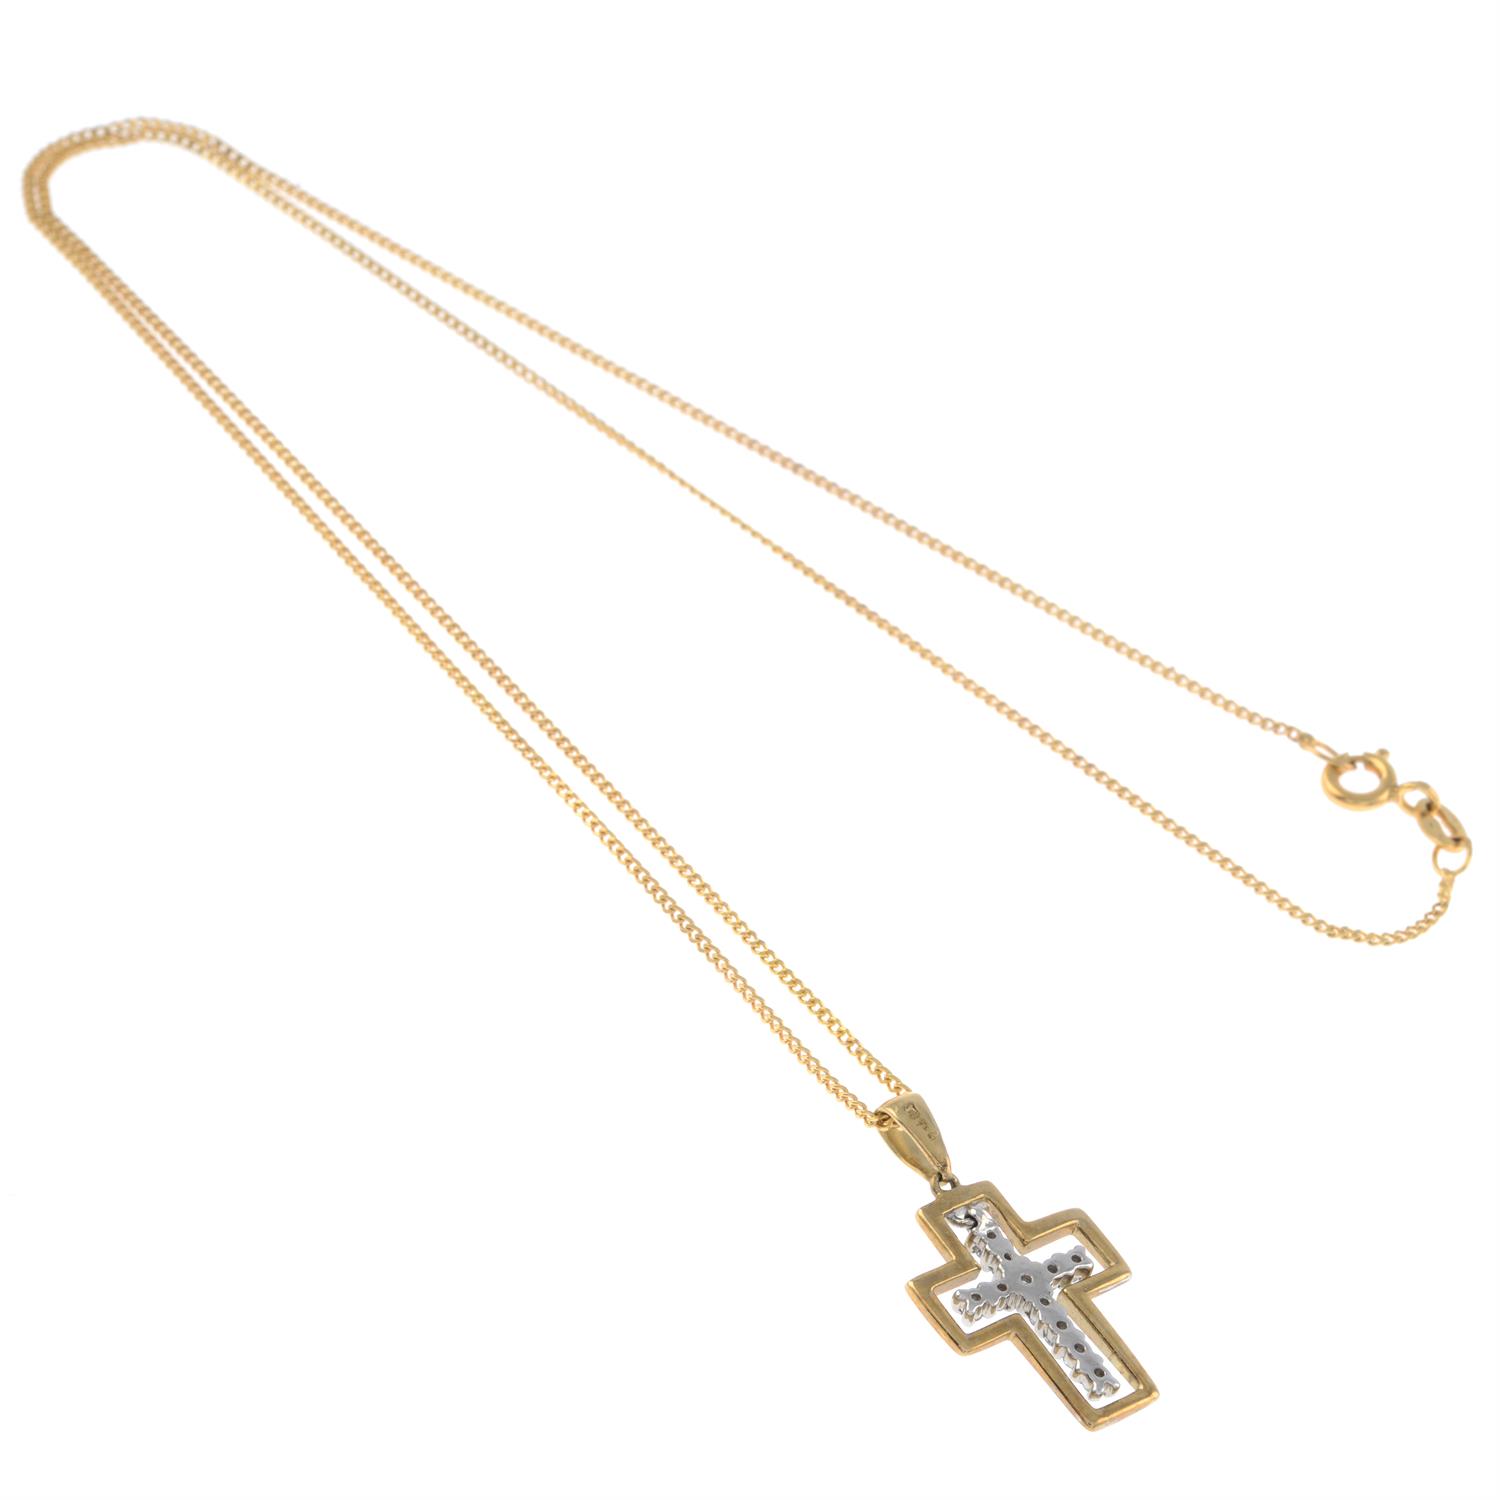 9ct gold diamond cross pendant, with chain - Image 2 of 2